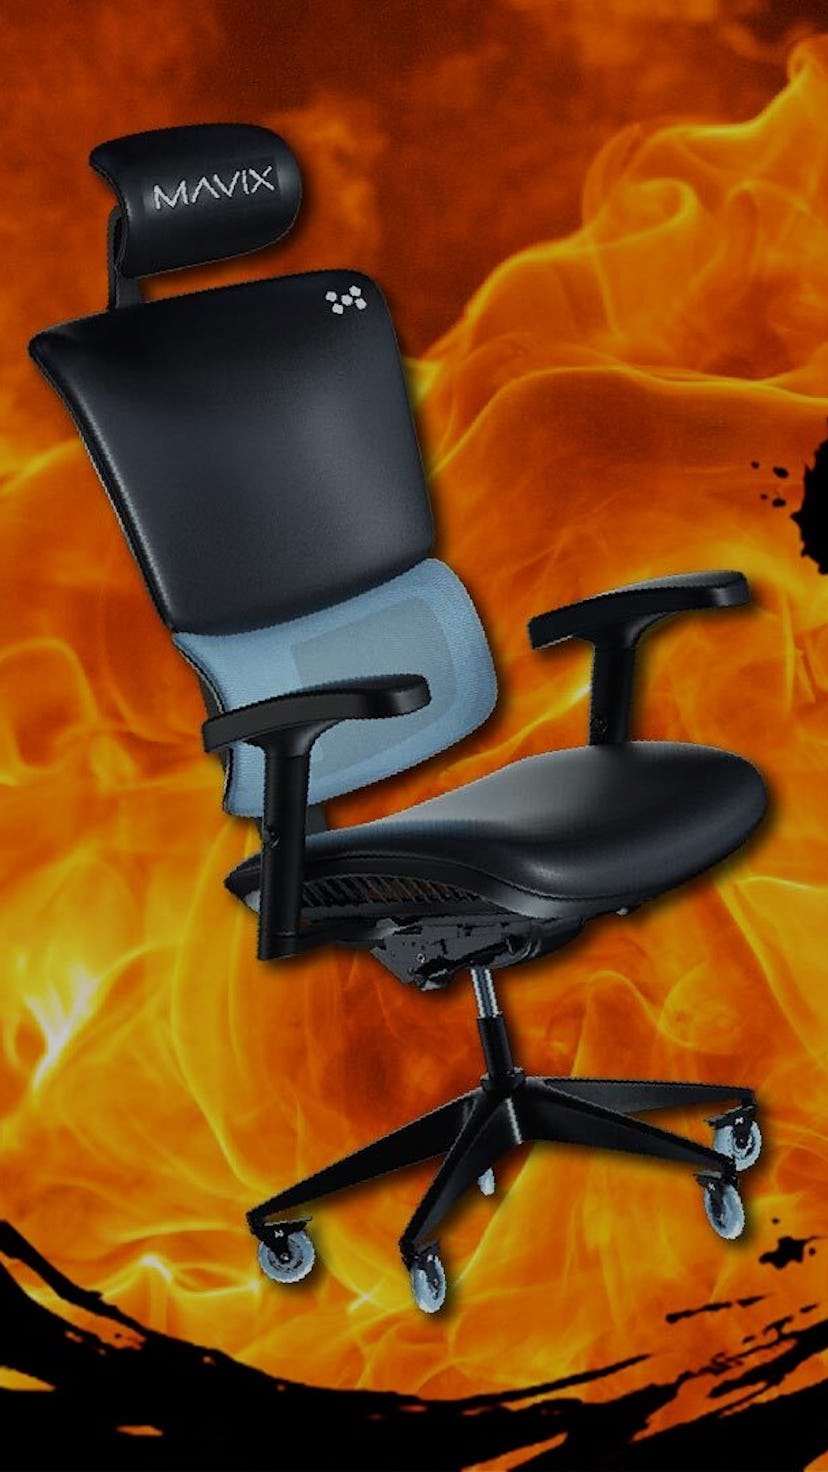 A fight between two gaming chairs.